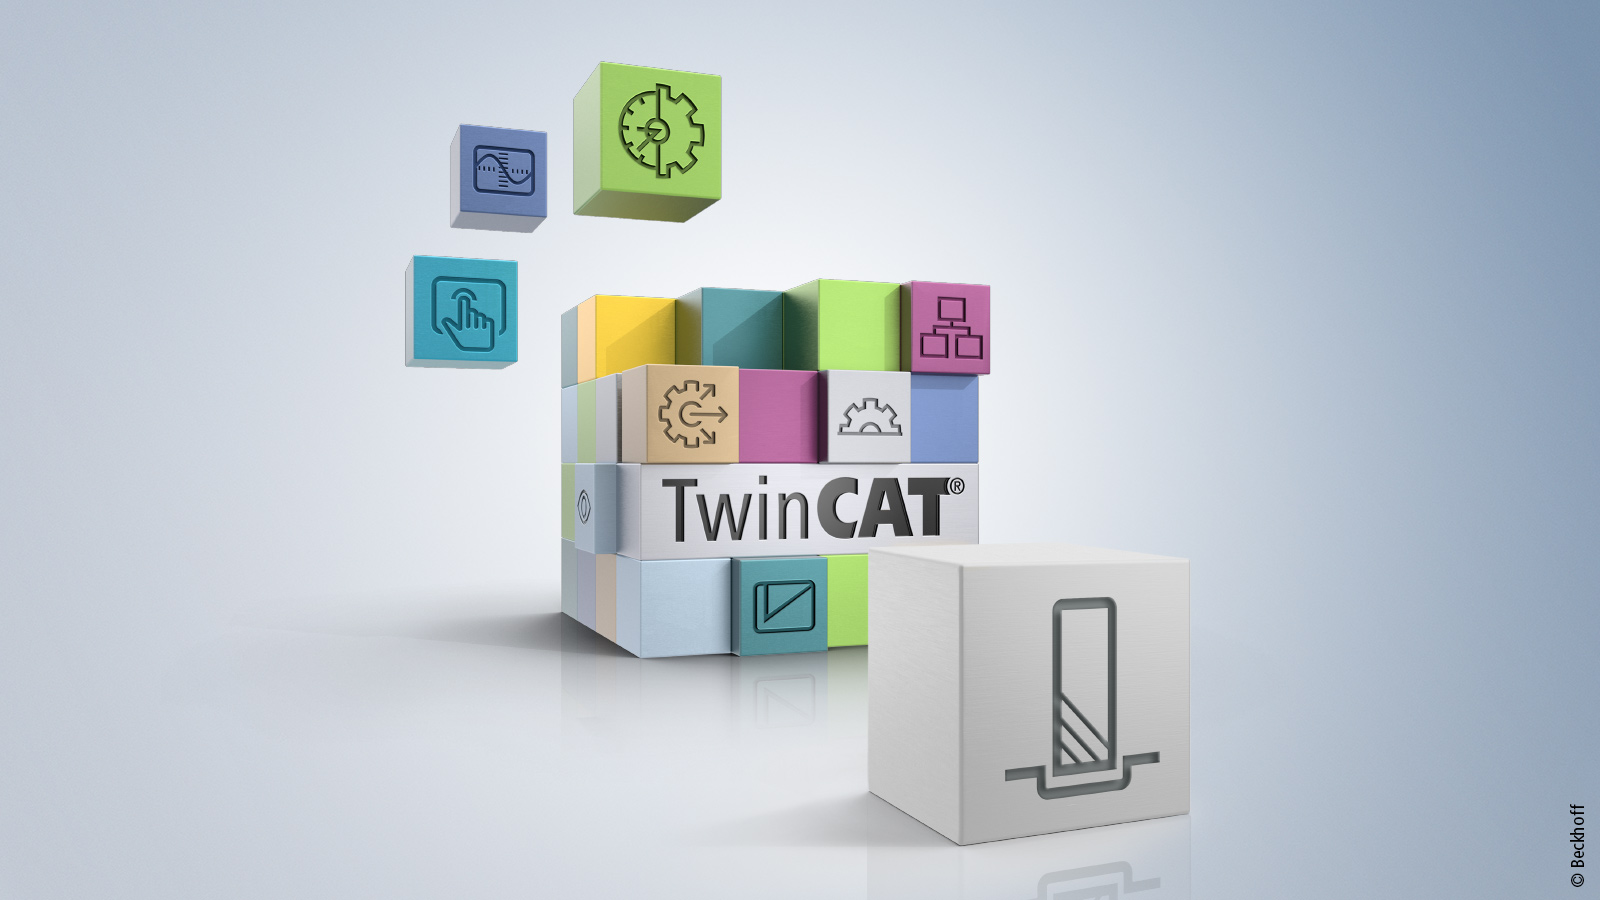 TwinCAT 3 CNC Milling Base simplifies the programming for drilling and milling machines into a comprehensive cycle package with parameterizable and reusable function blocks.